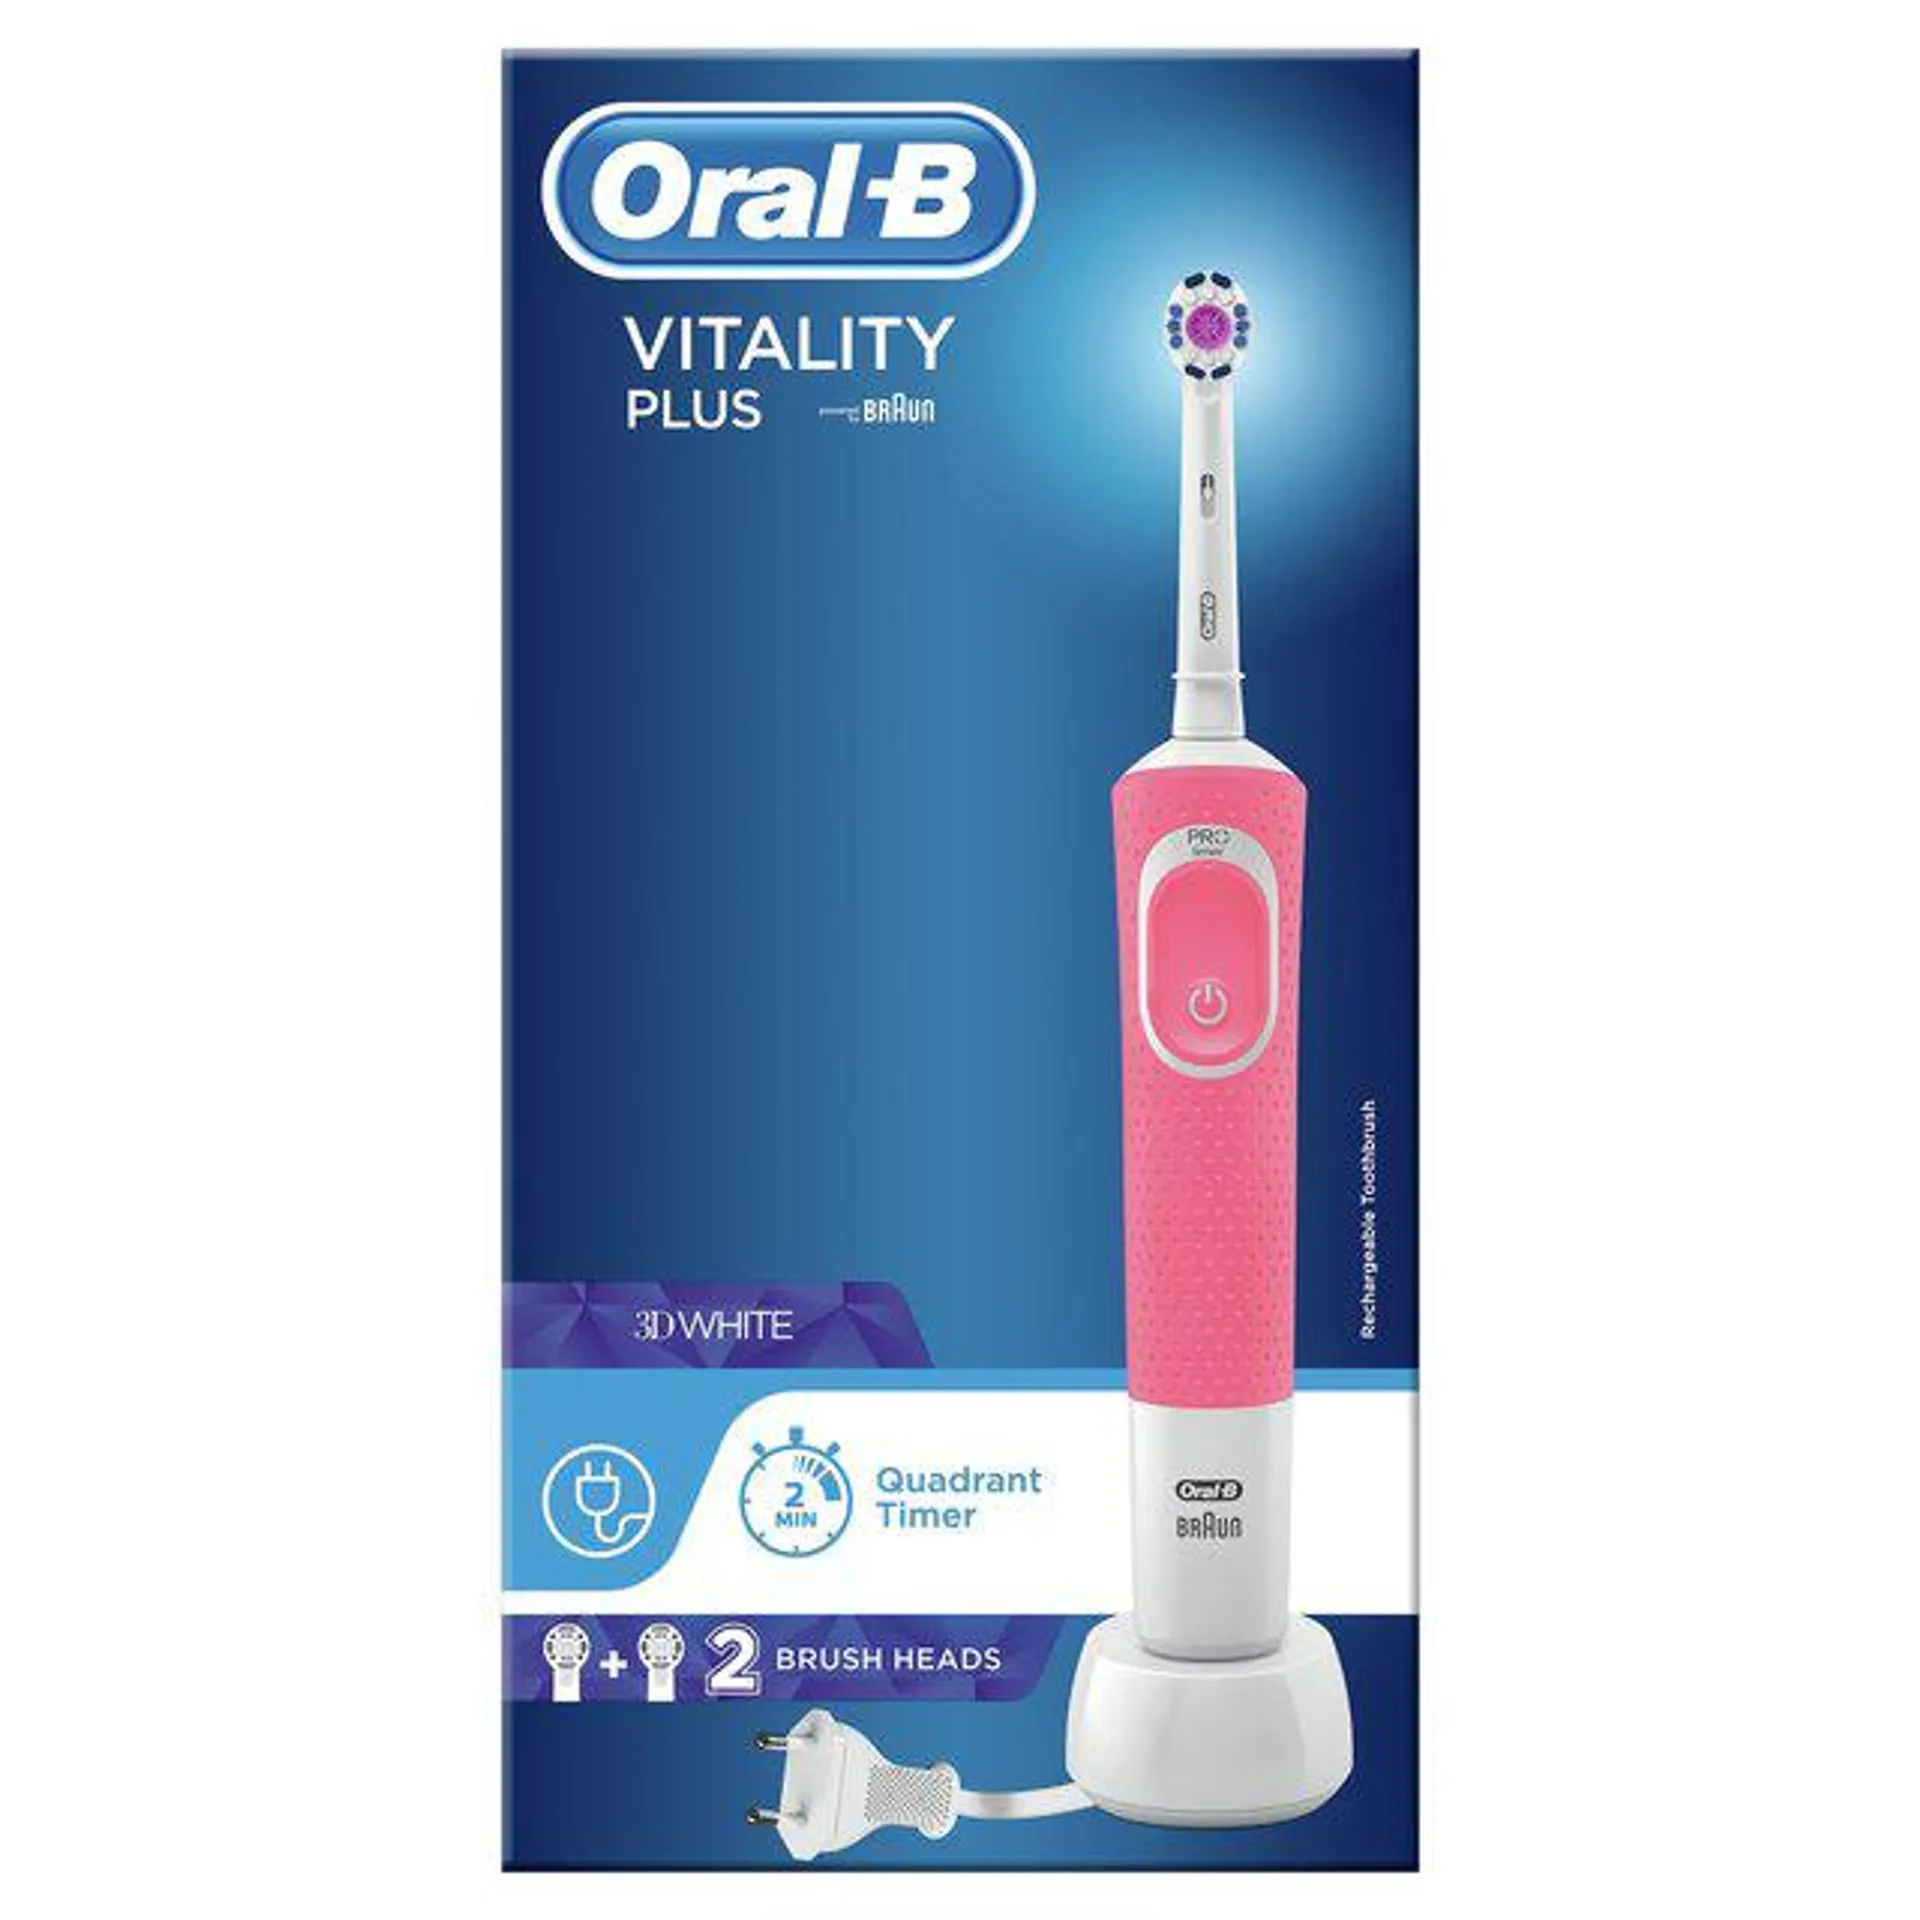 Oral-B Vitality Plus White & Clean Electric Rechargeable Toothbrush